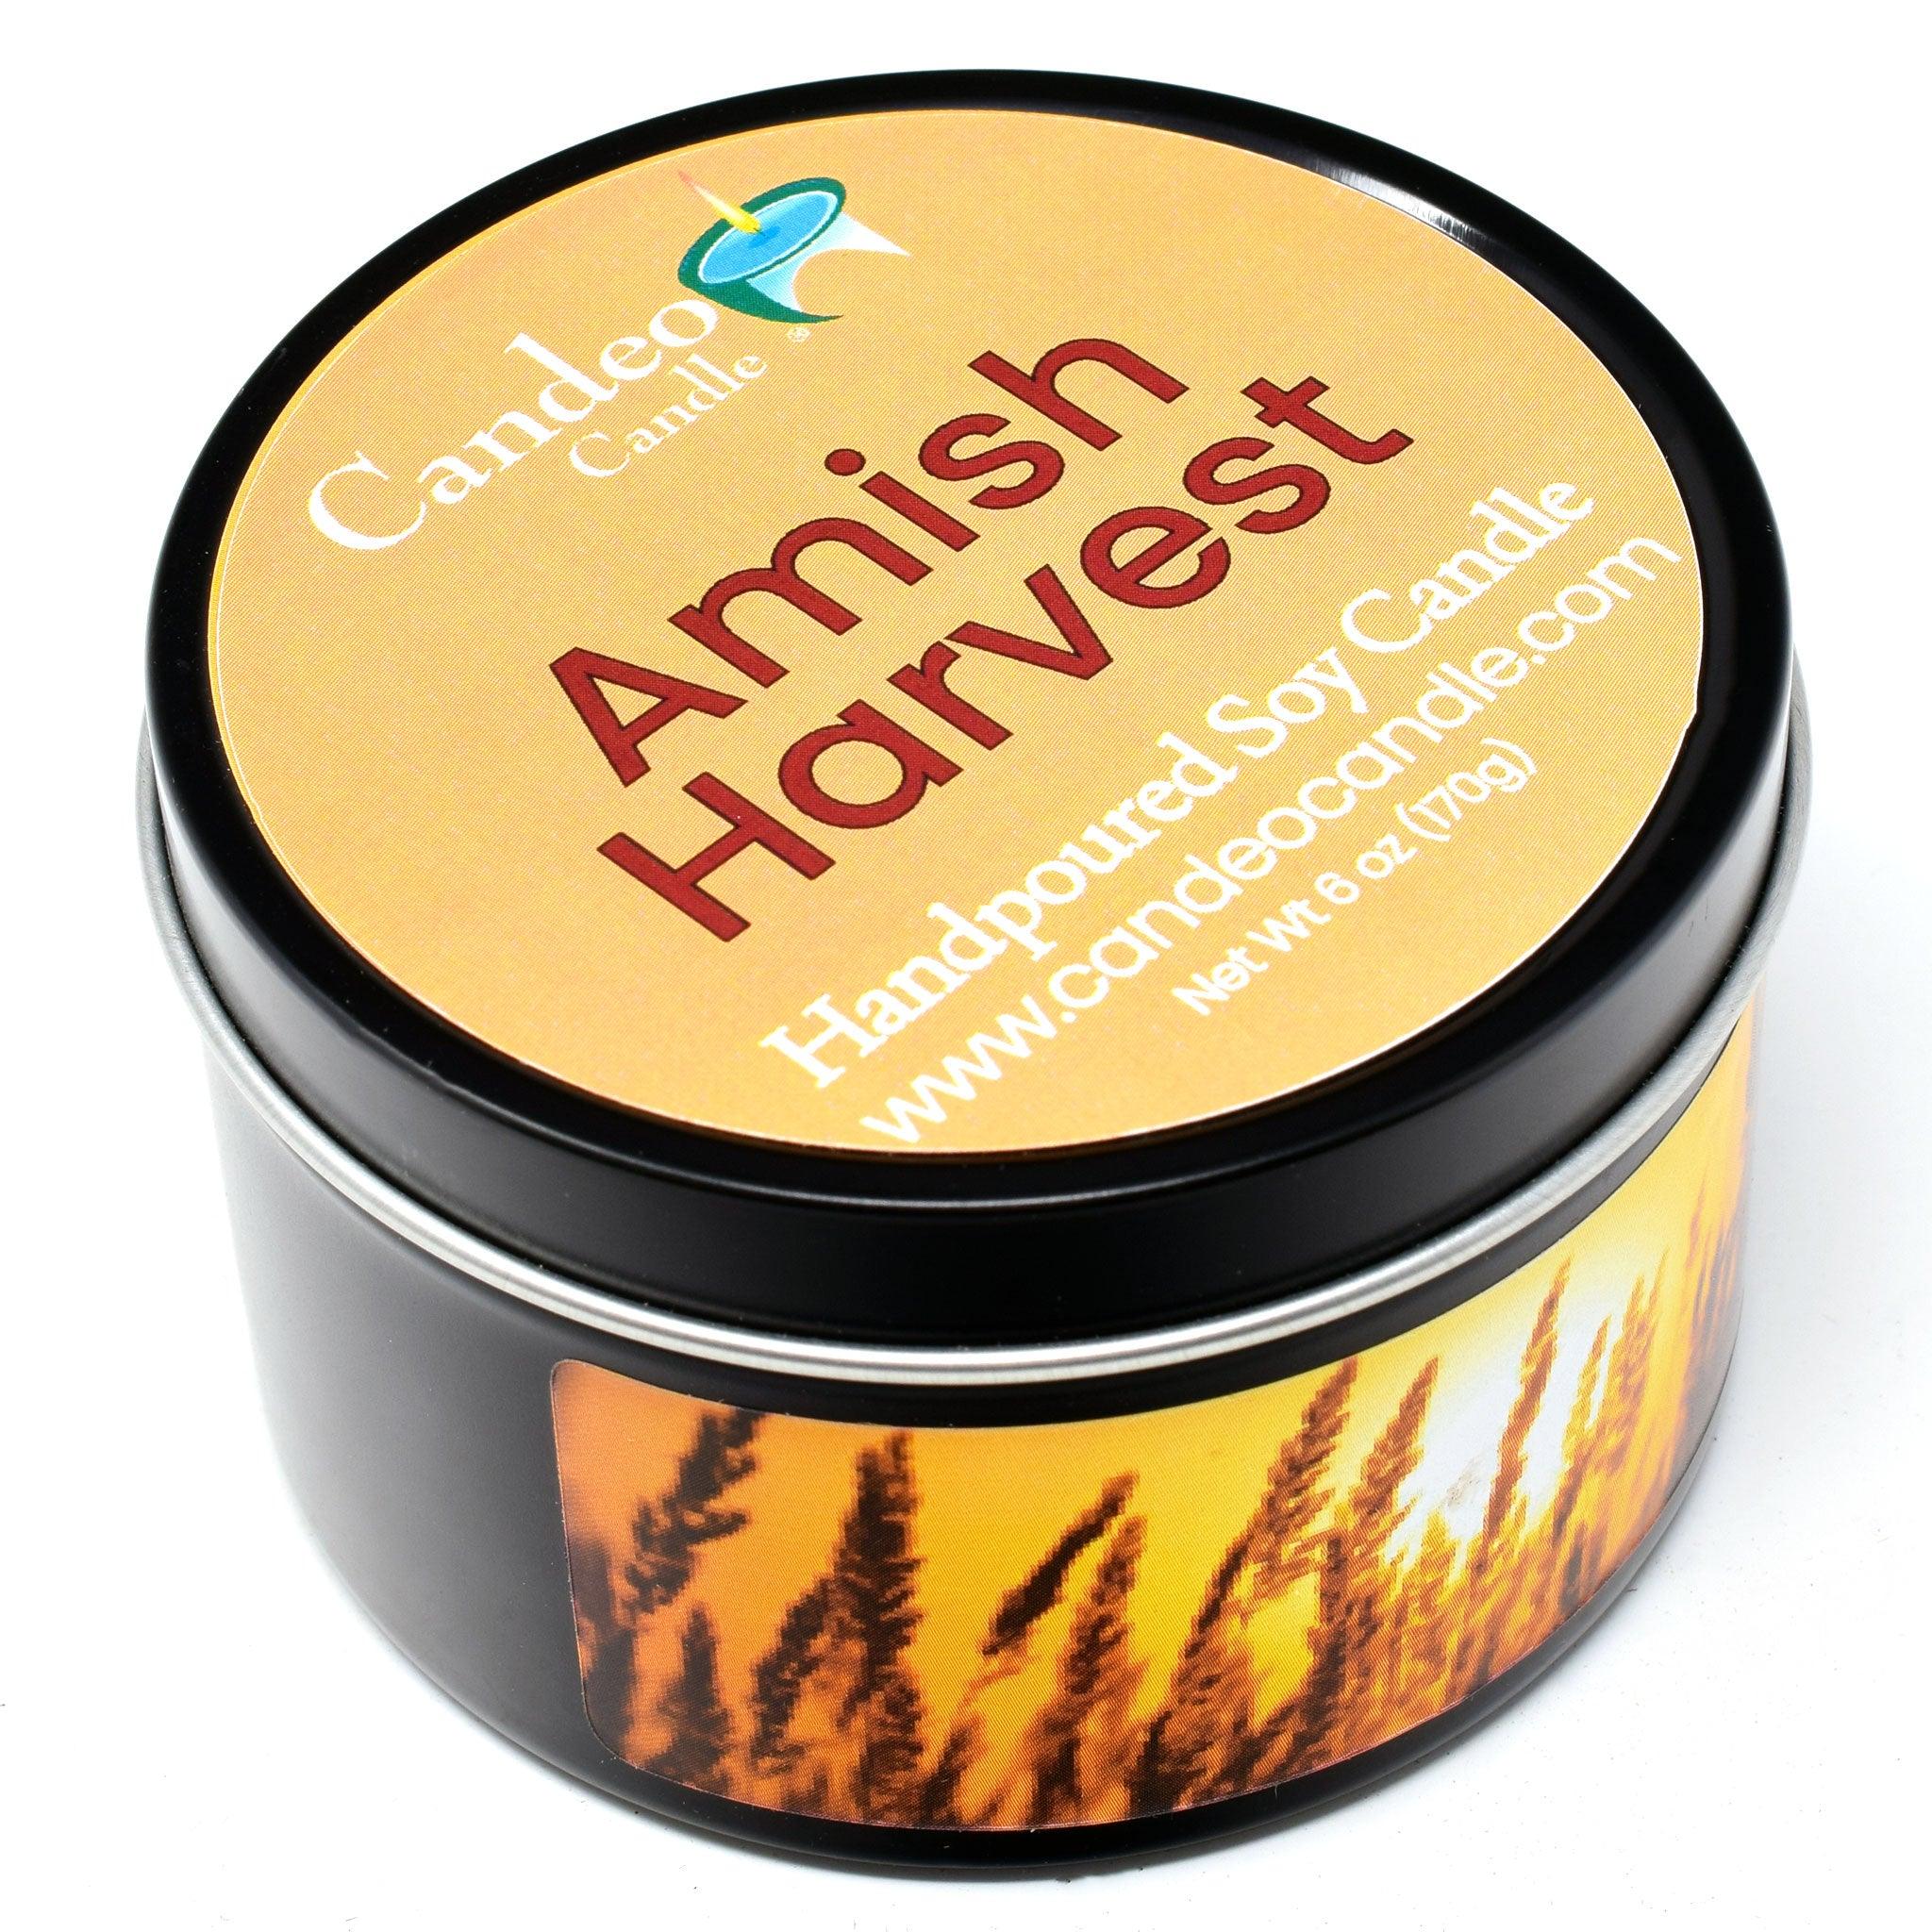 Amish Harvest, 6oz Soy Candle Tin - Candeo Candle